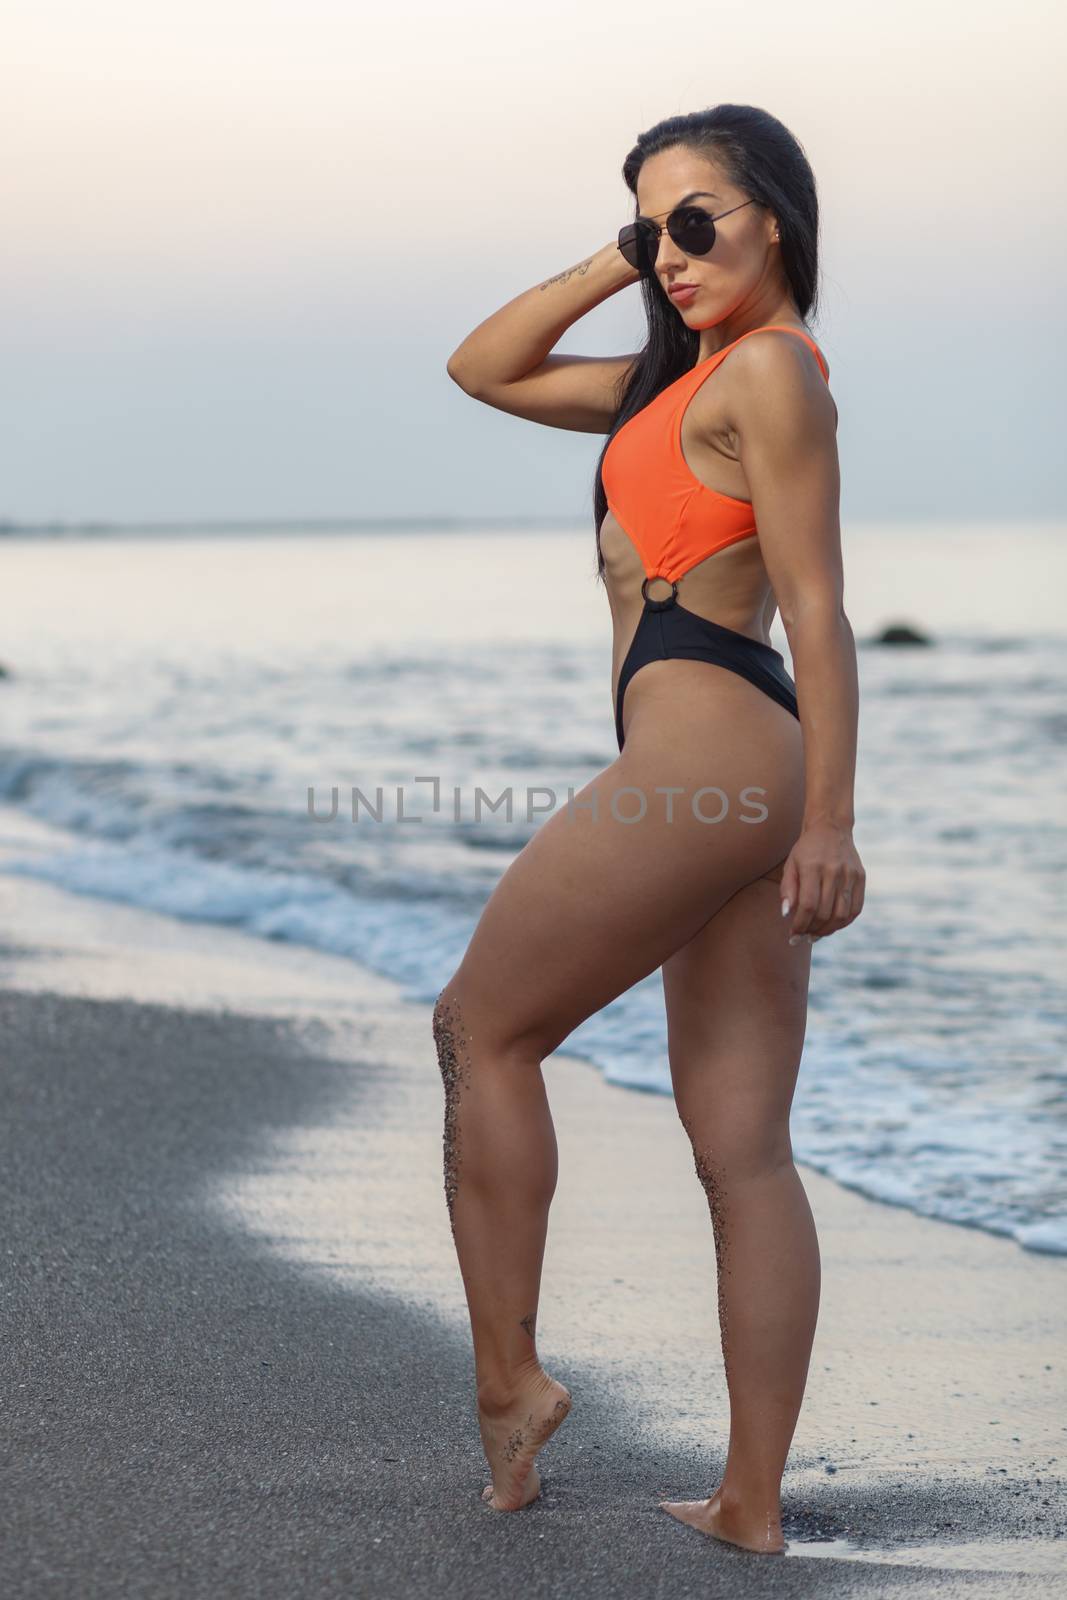 Fitness girl posing 
in the shore of the beach with a beautiful black and orange bikini and sunglasses